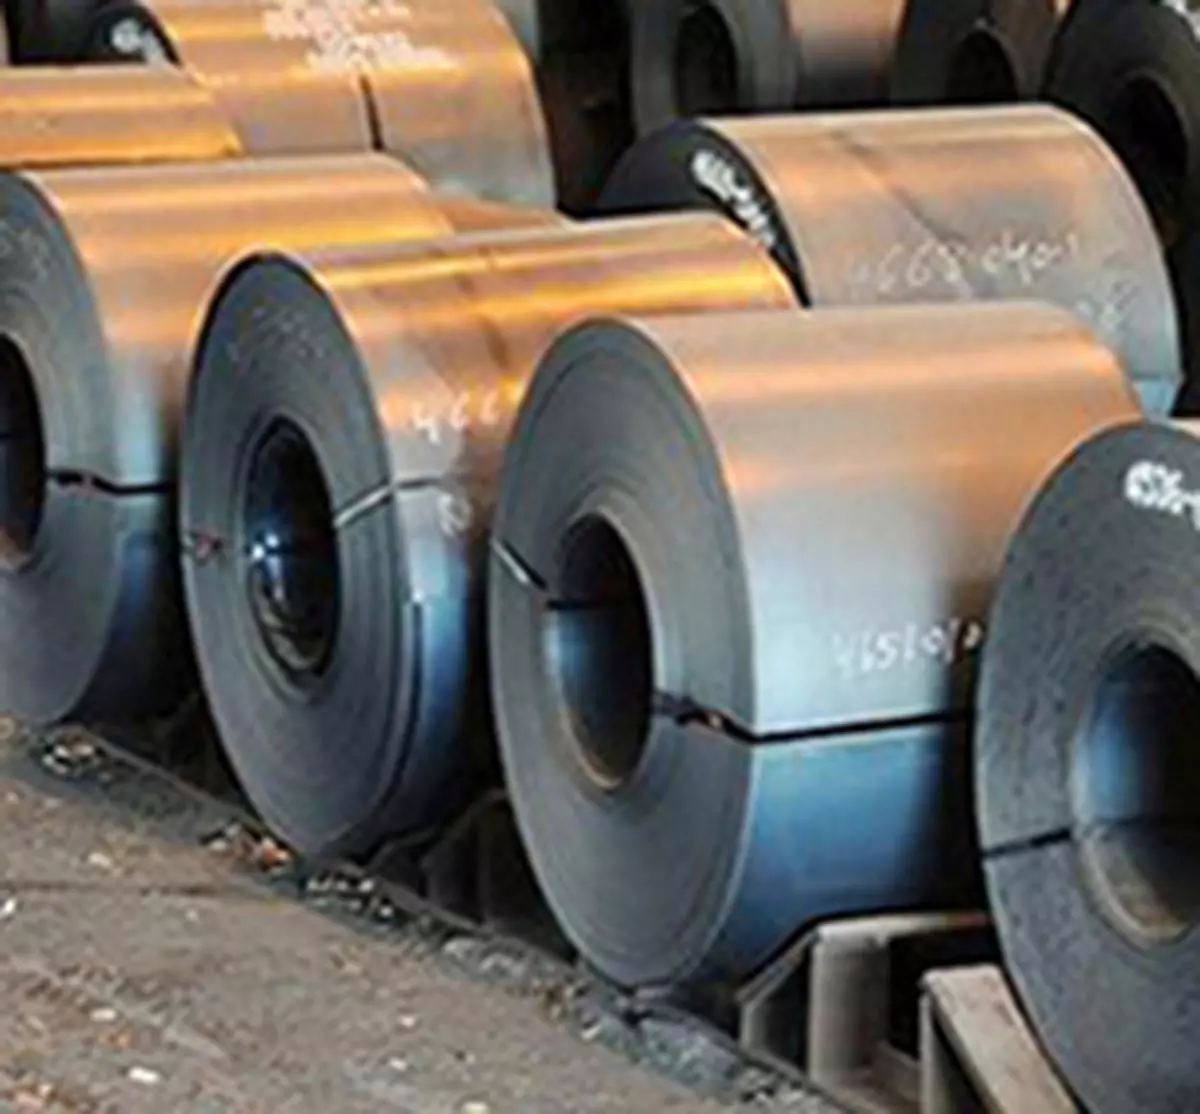 For Q1FY23, the crude steel production was 4.3 million tonnes, up 15 per cent over the same period last fiscal